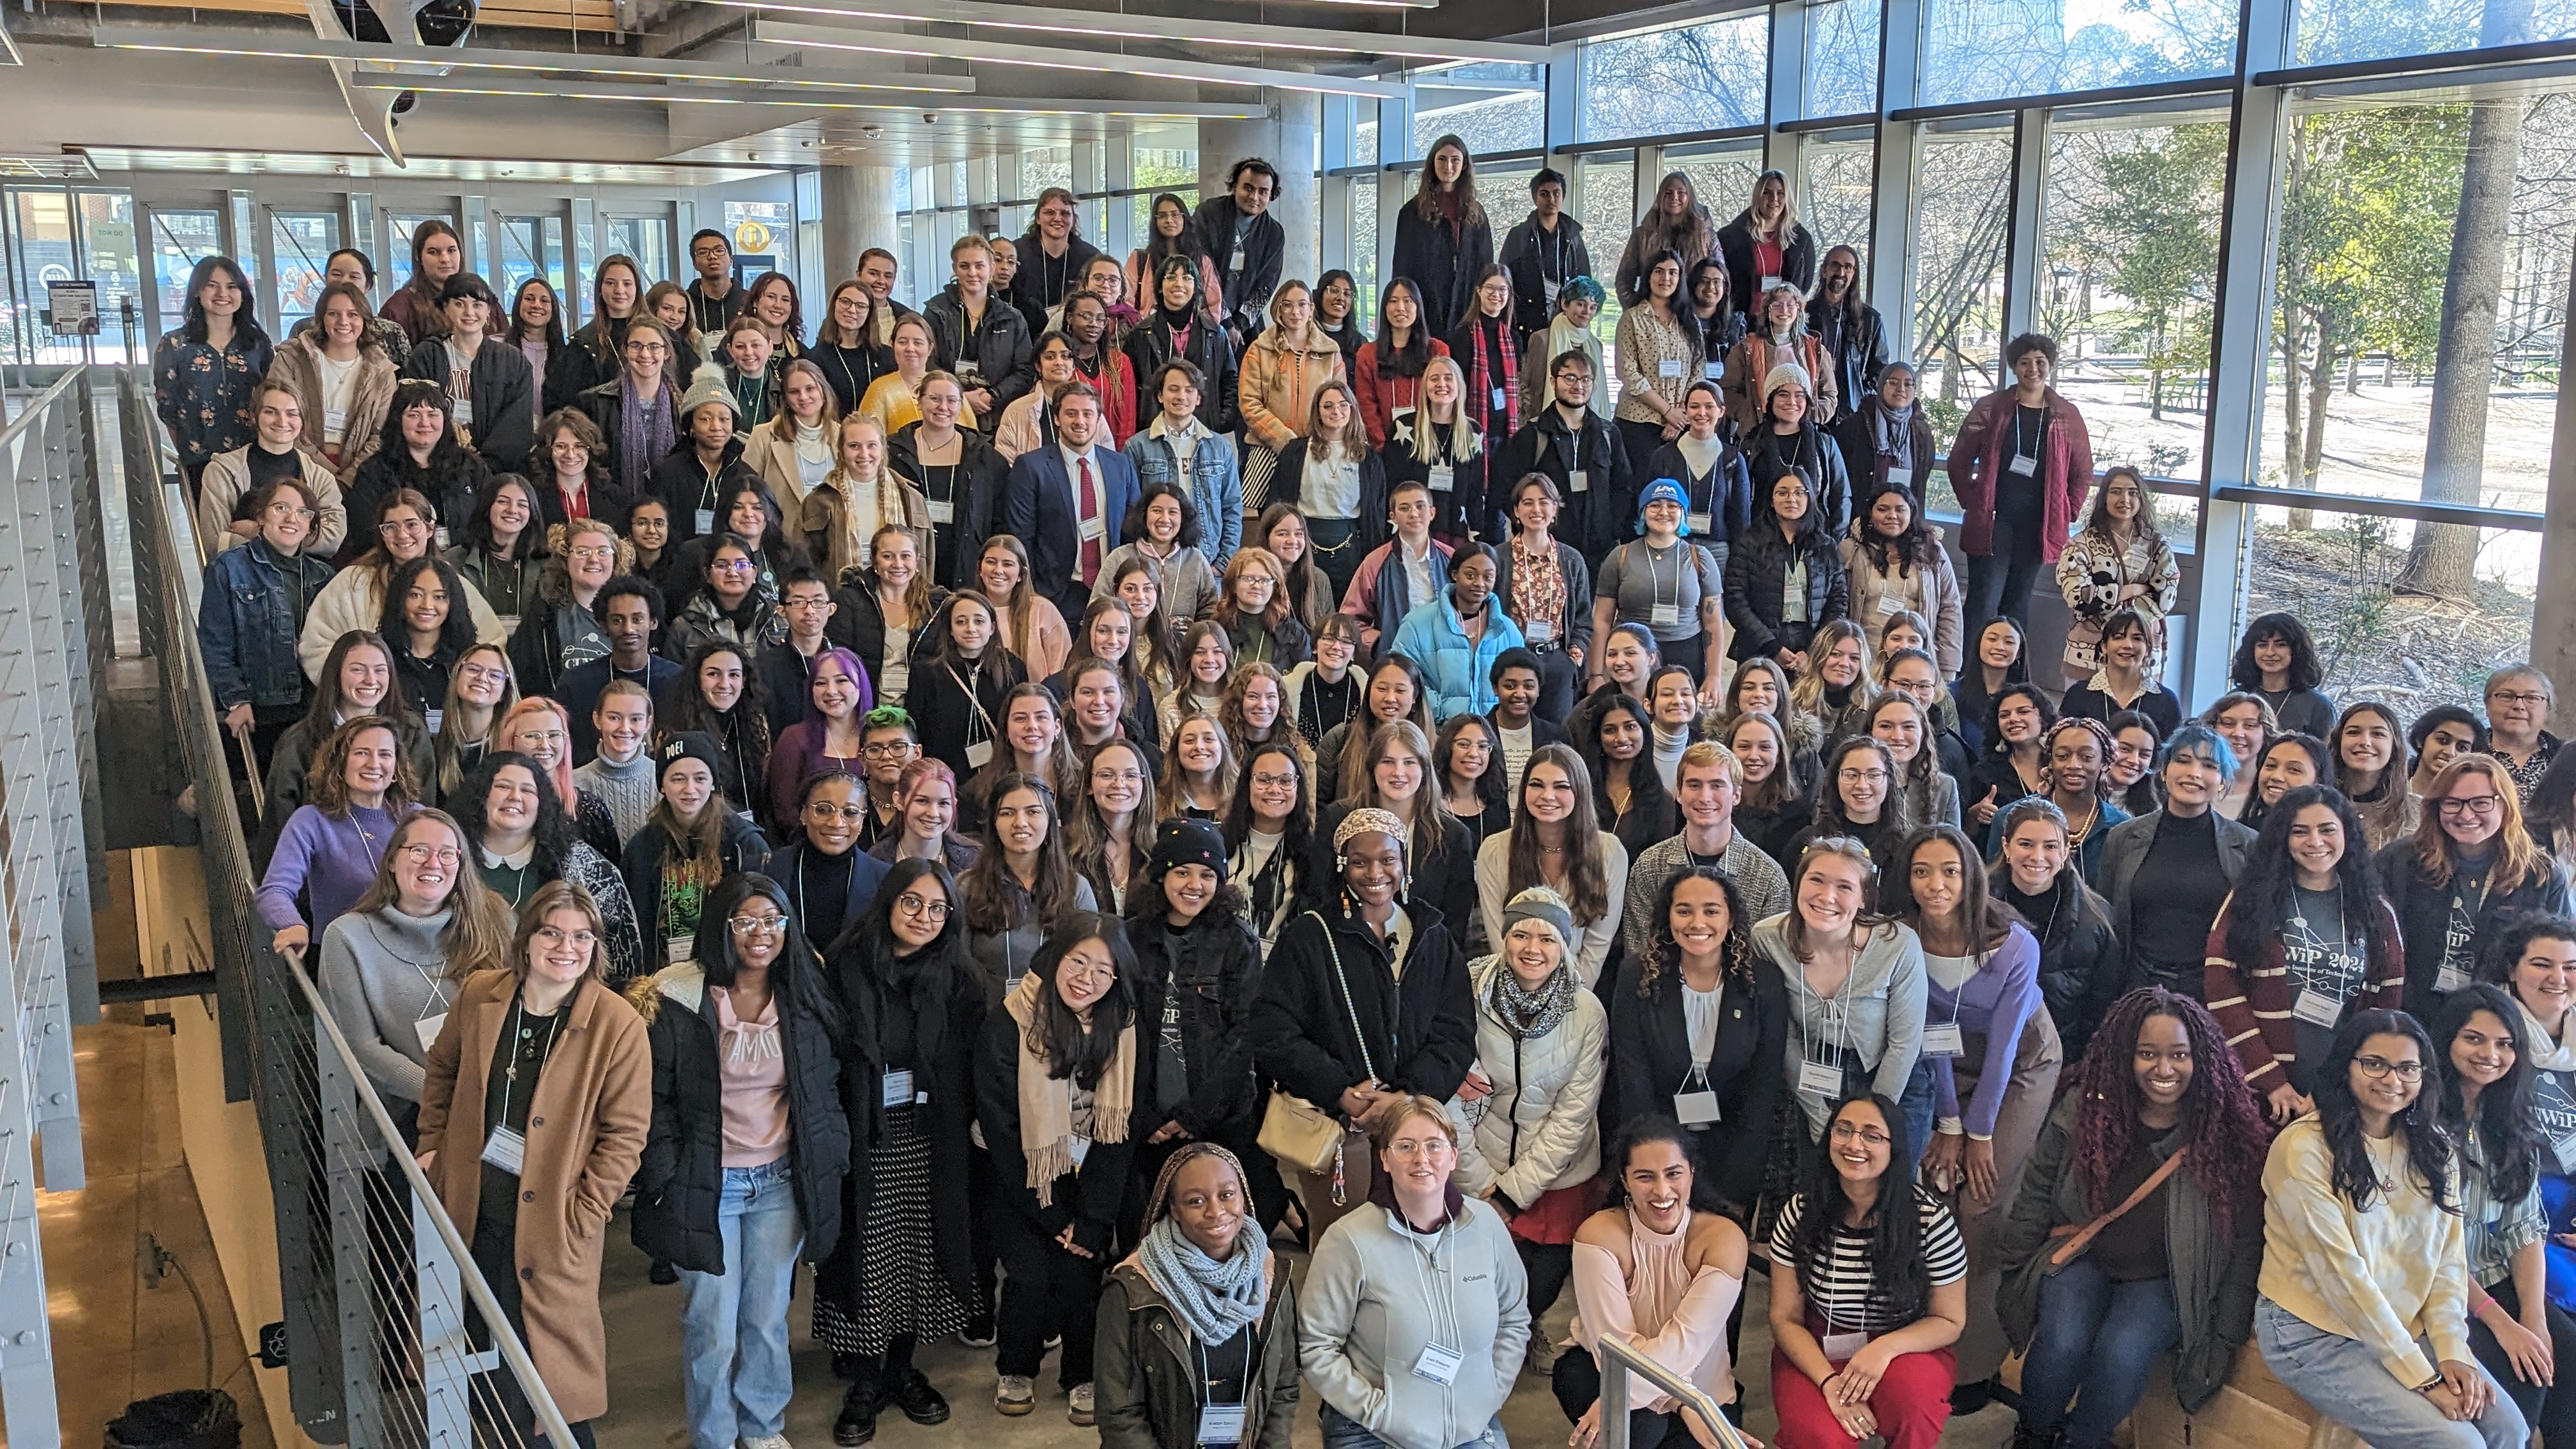 Nearly 200 students attended the regional Conference for Undergraduate Women in Physics, hosted in January by Georgia Tech.